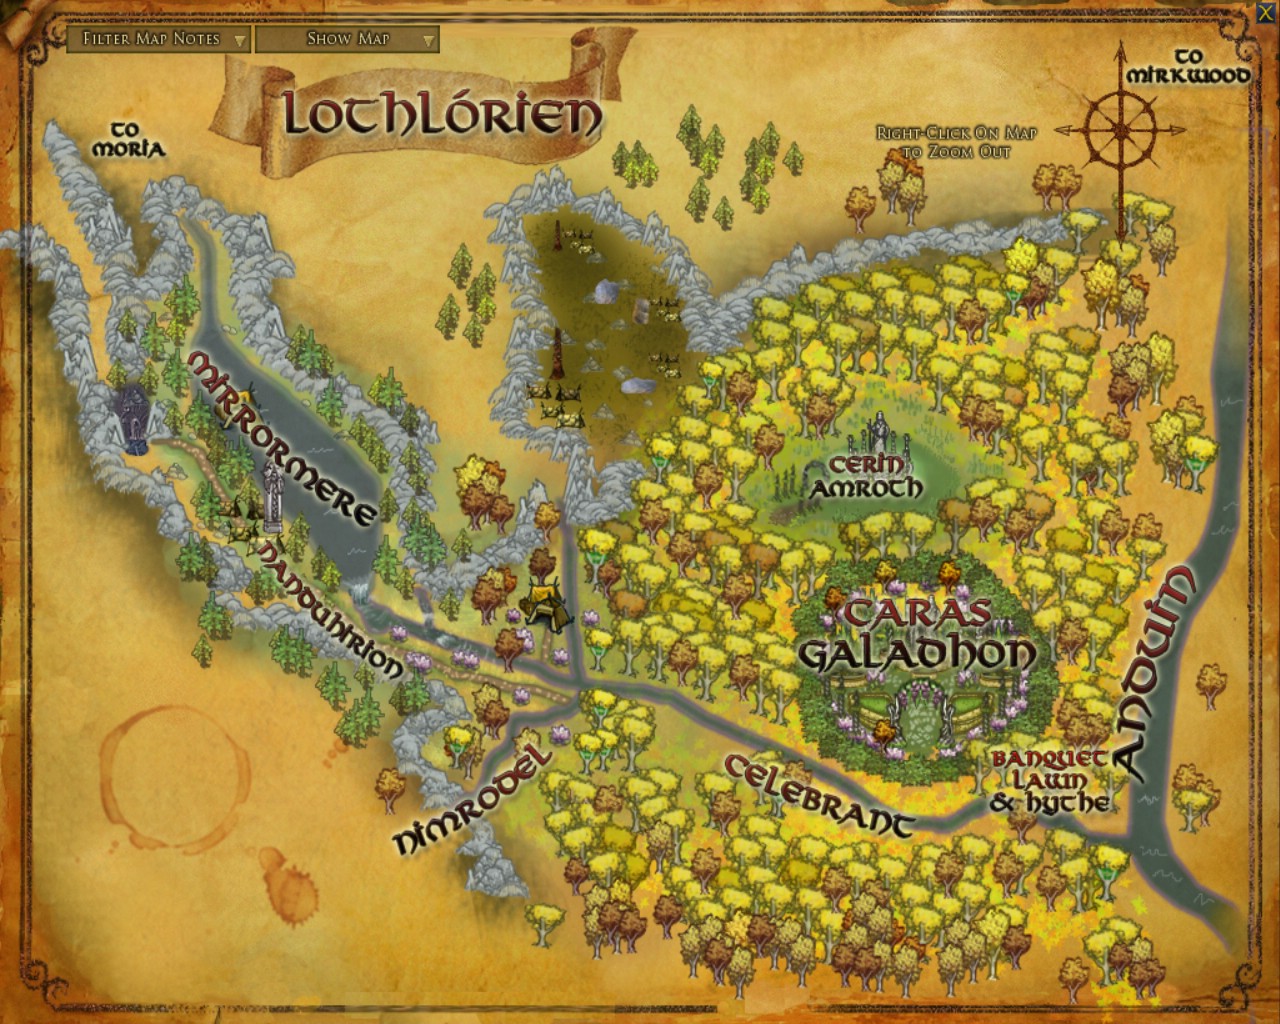 Lothlórien - Lord of the Rings Wiki